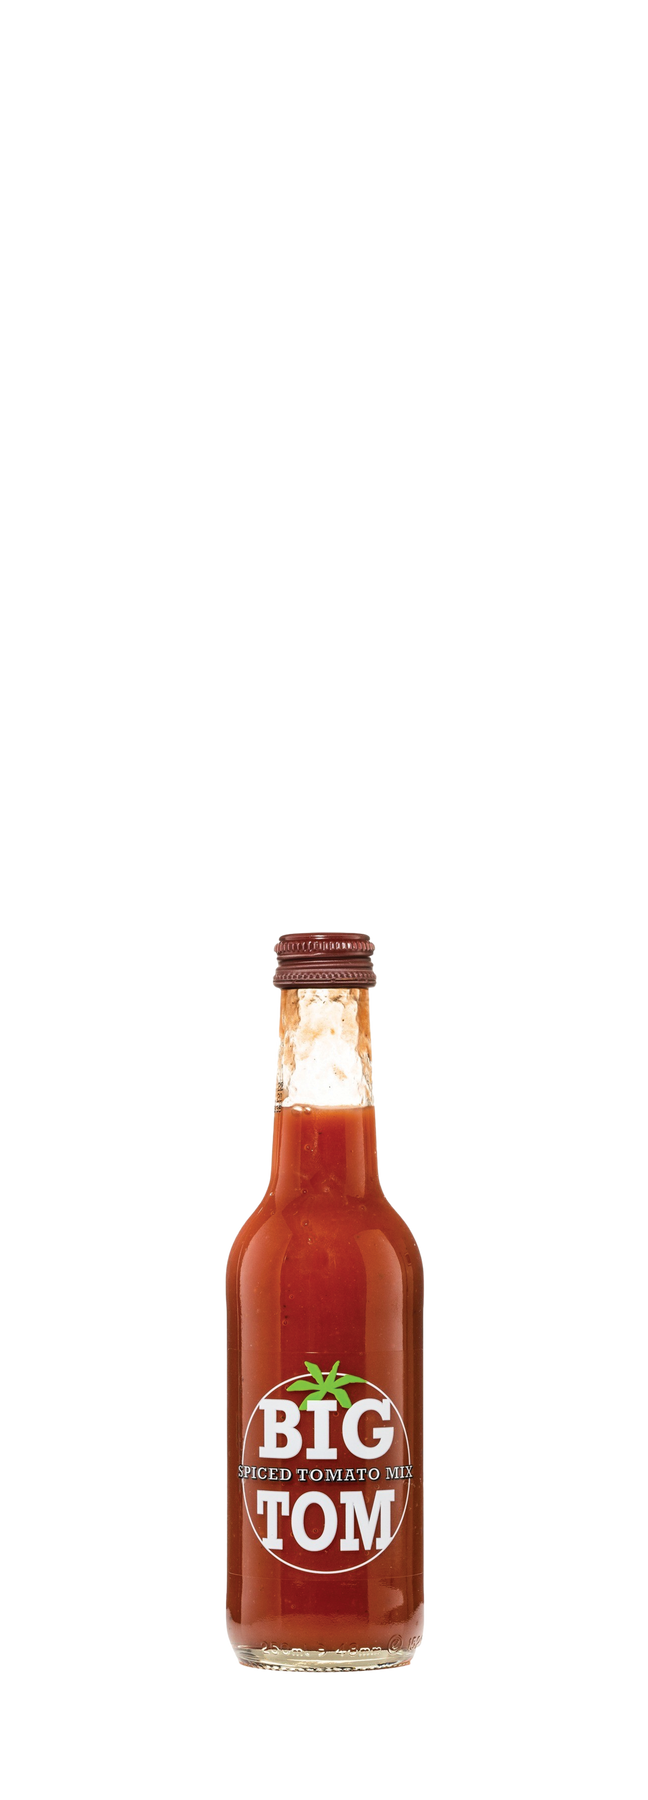 Spiced tomato mix 25cl